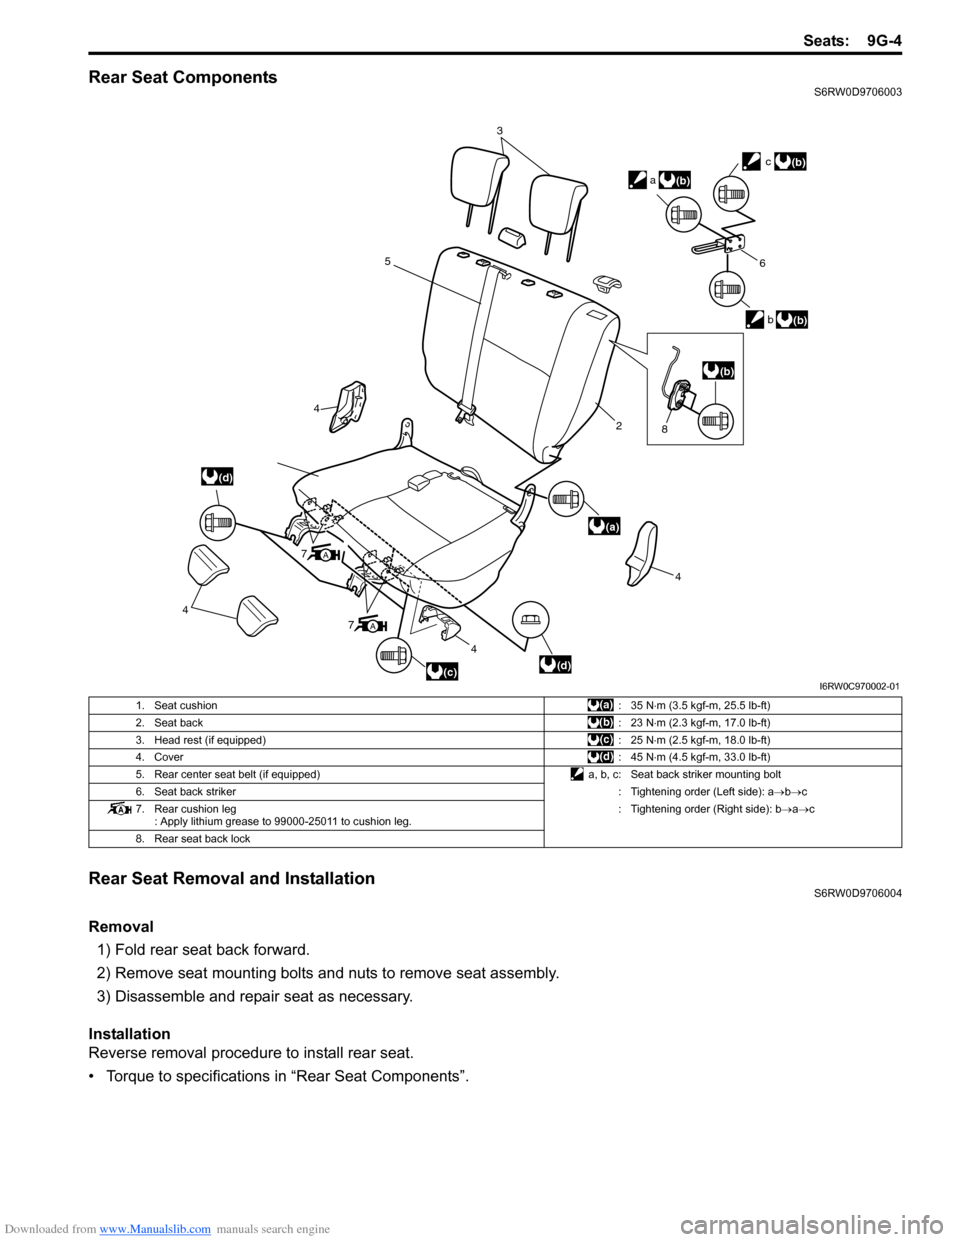 SUZUKI SX4 2006 1.G Service Workshop Manual Downloaded from www.Manualslib.com manuals search engine Seats: 9G-4
Rear Seat ComponentsS6RW0D9706003
Rear Seat Removal and InstallationS6RW0D9706004
Removal
1) Fold rear seat back forward.
2) Remove